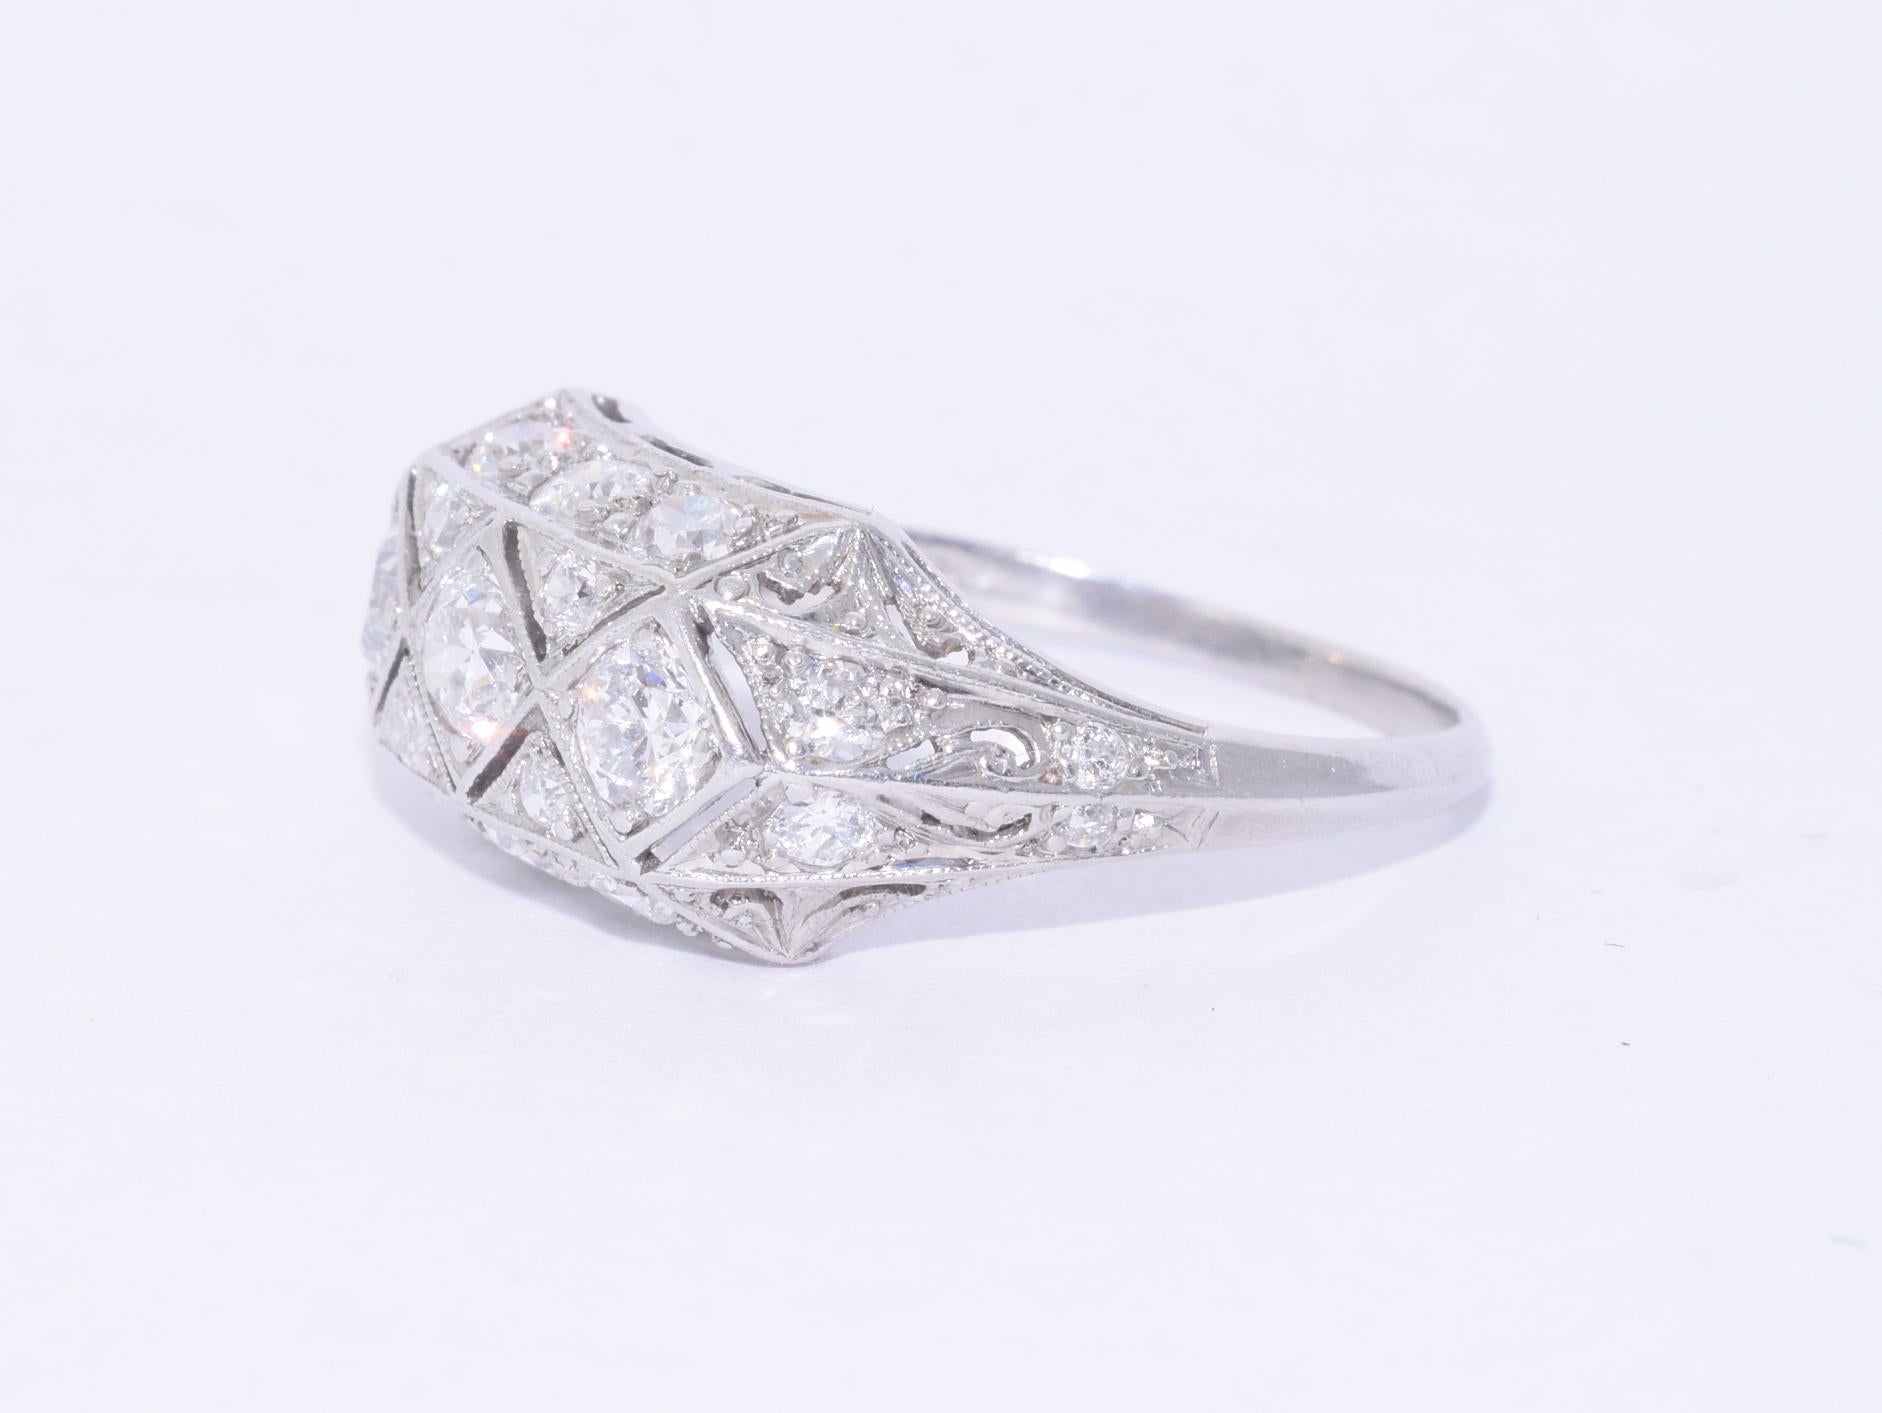 Round diamonds totaling approximately 1.30 carats are mounted in a patterned platinum ring. The ring is currently a size 7.5 and measures approximately 3/8 inch wide.